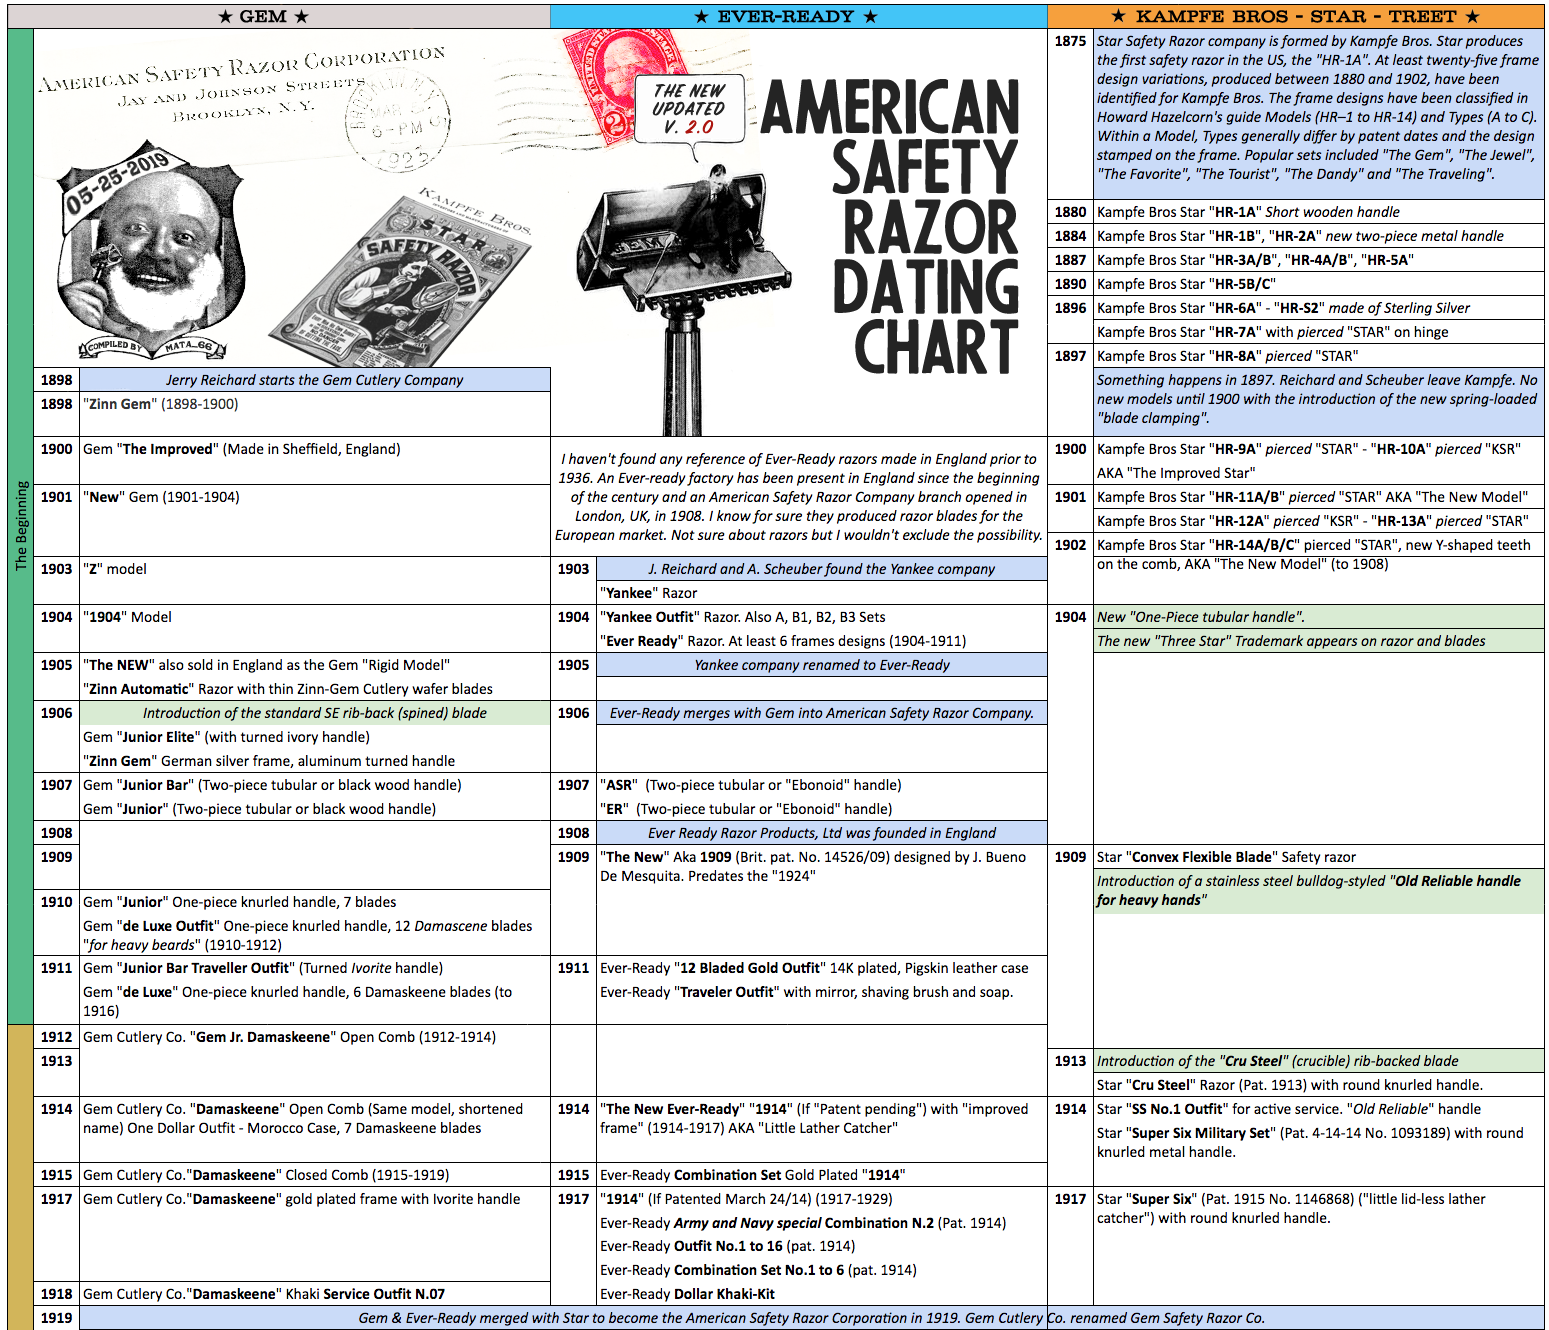 american-safety-razor-dating-chart-gem-ever-ready-kampfe-star-2.png